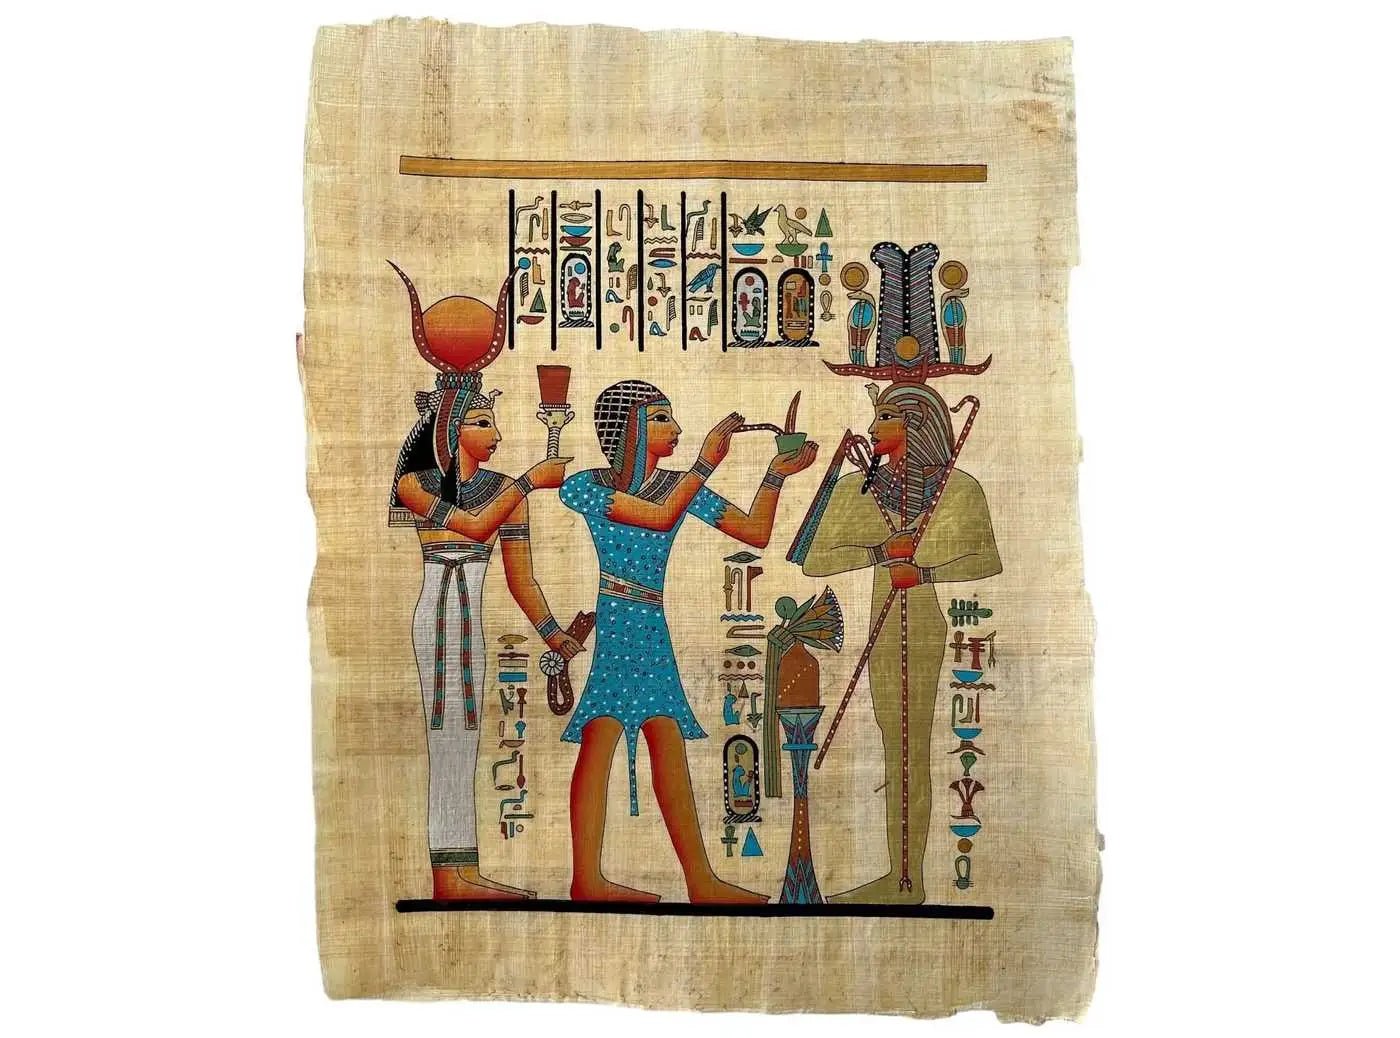 Prince of Egypt - 100% Authentic Egyptian Original Hand Painted Painting Papyrus - Egypt Papyrus Painting